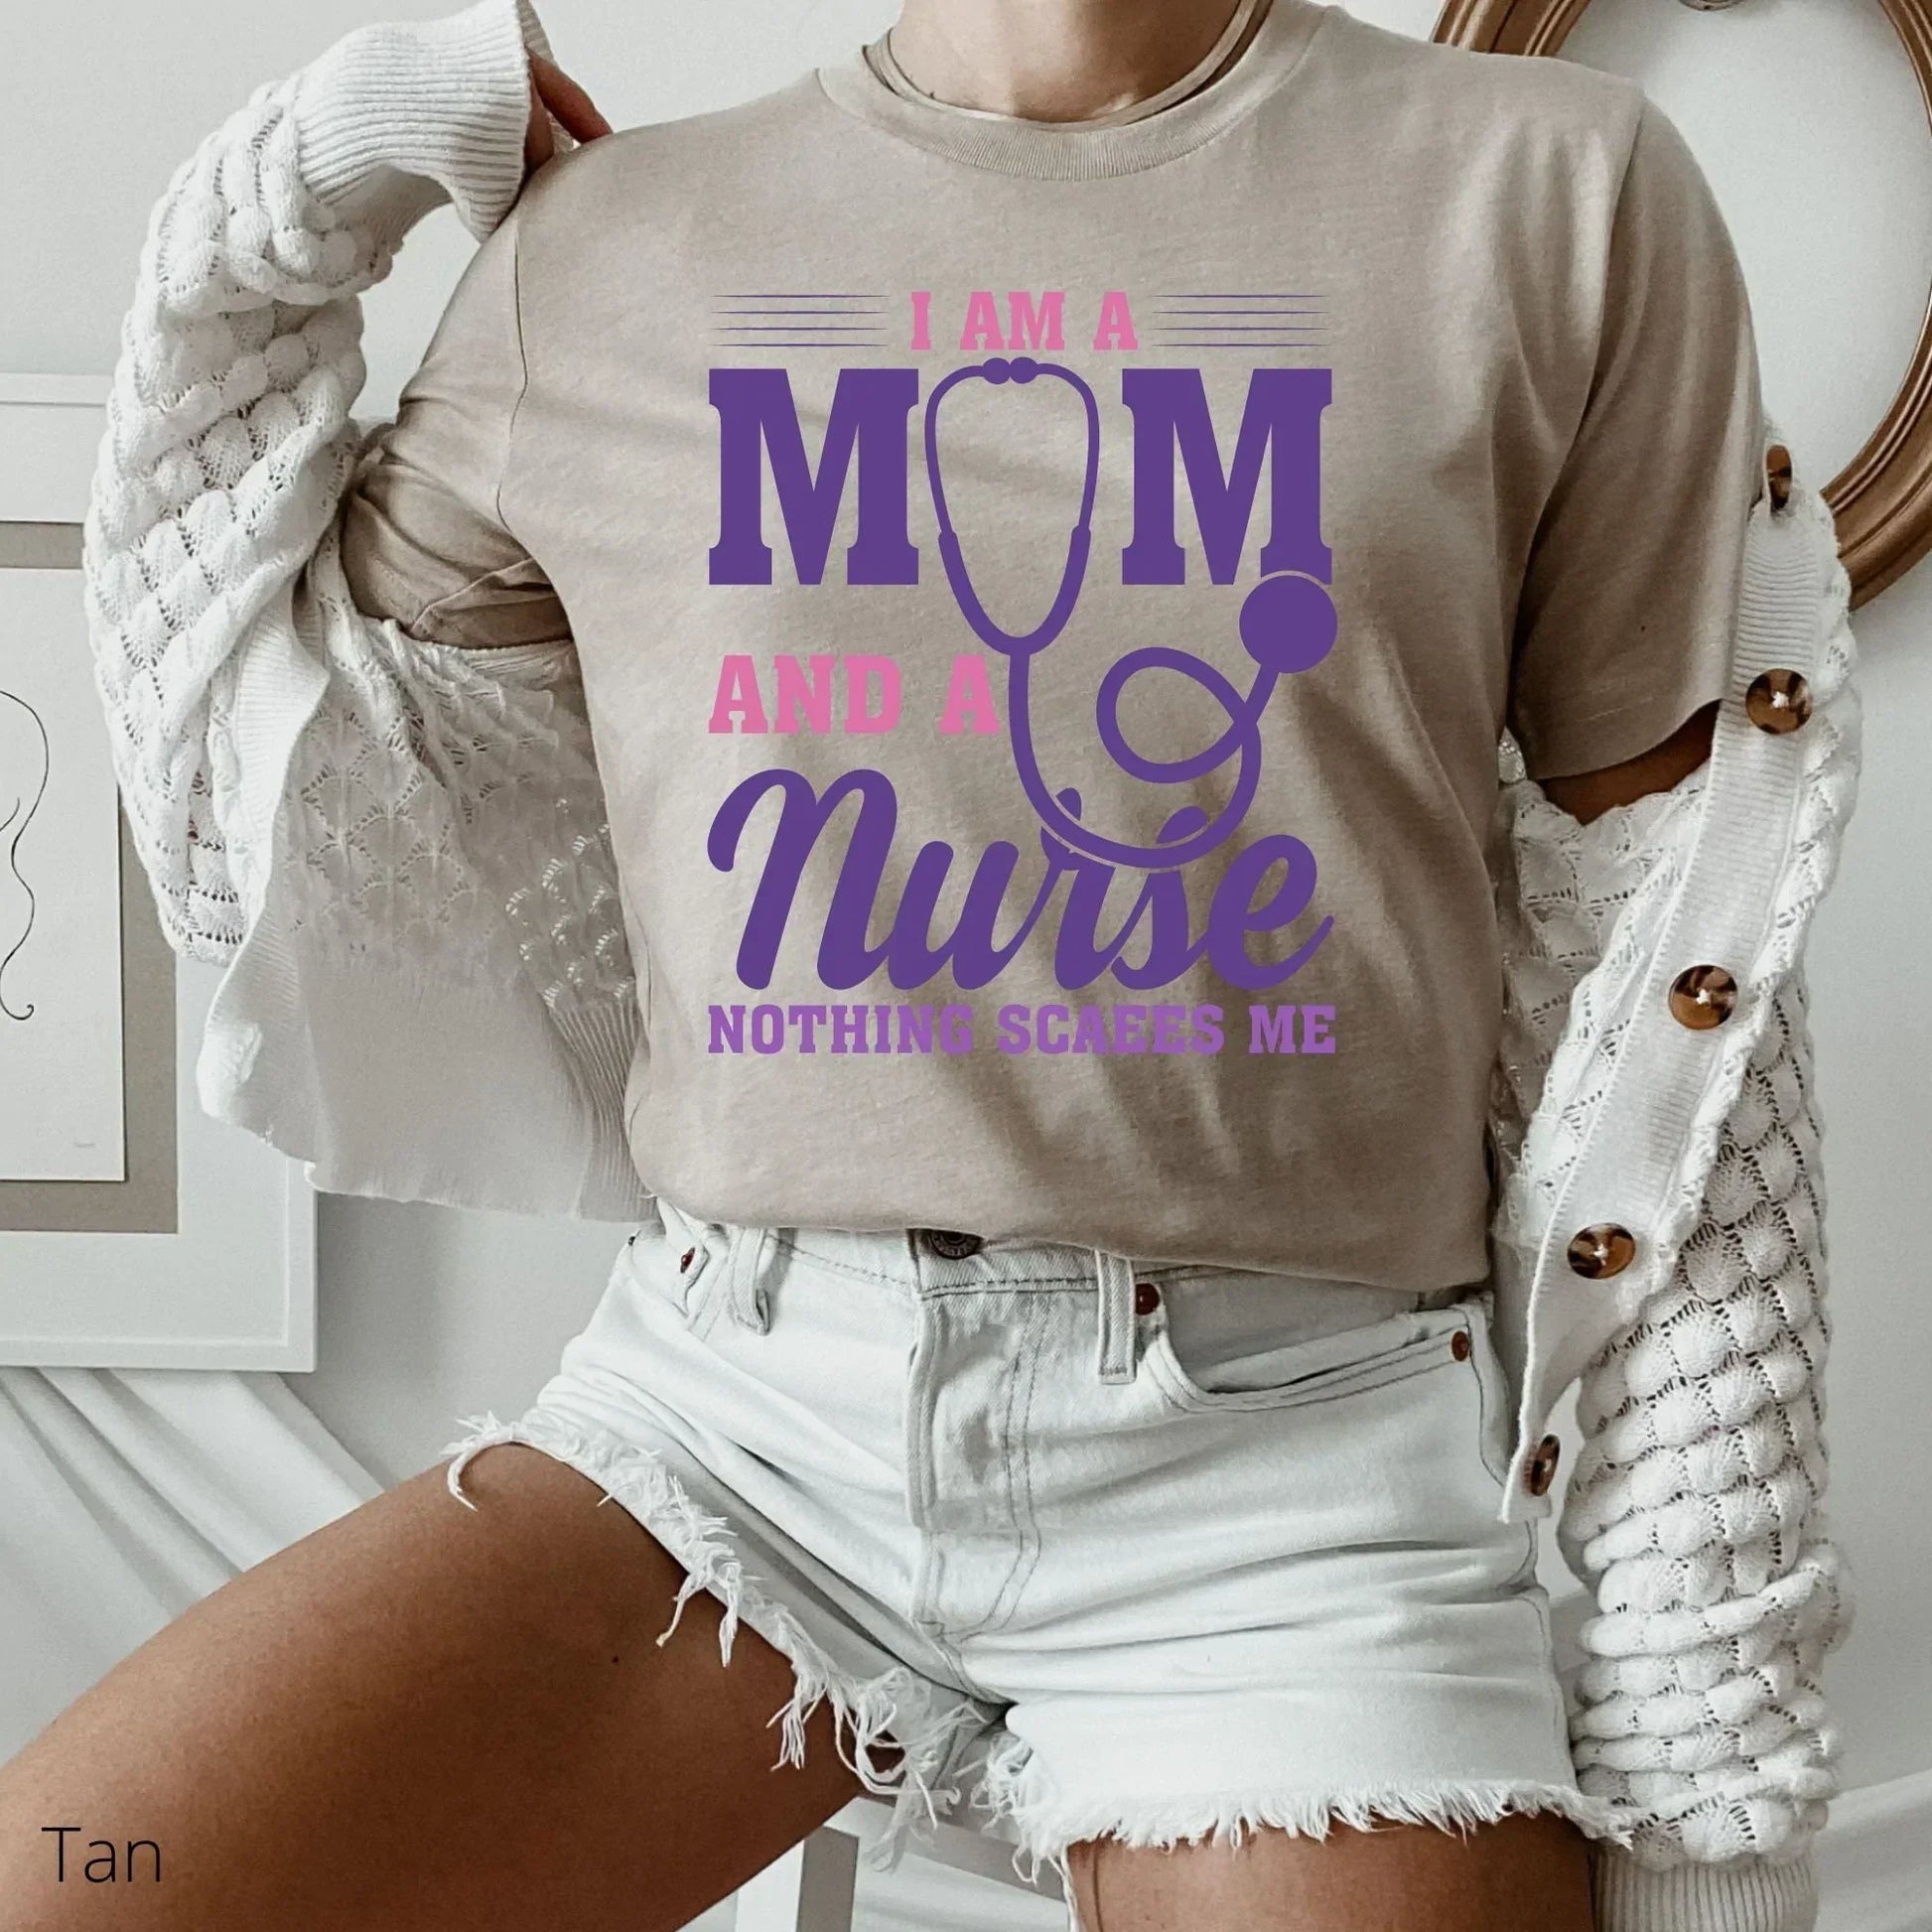 Mom Nurse Shirt, Mother's Day Gift for Mom